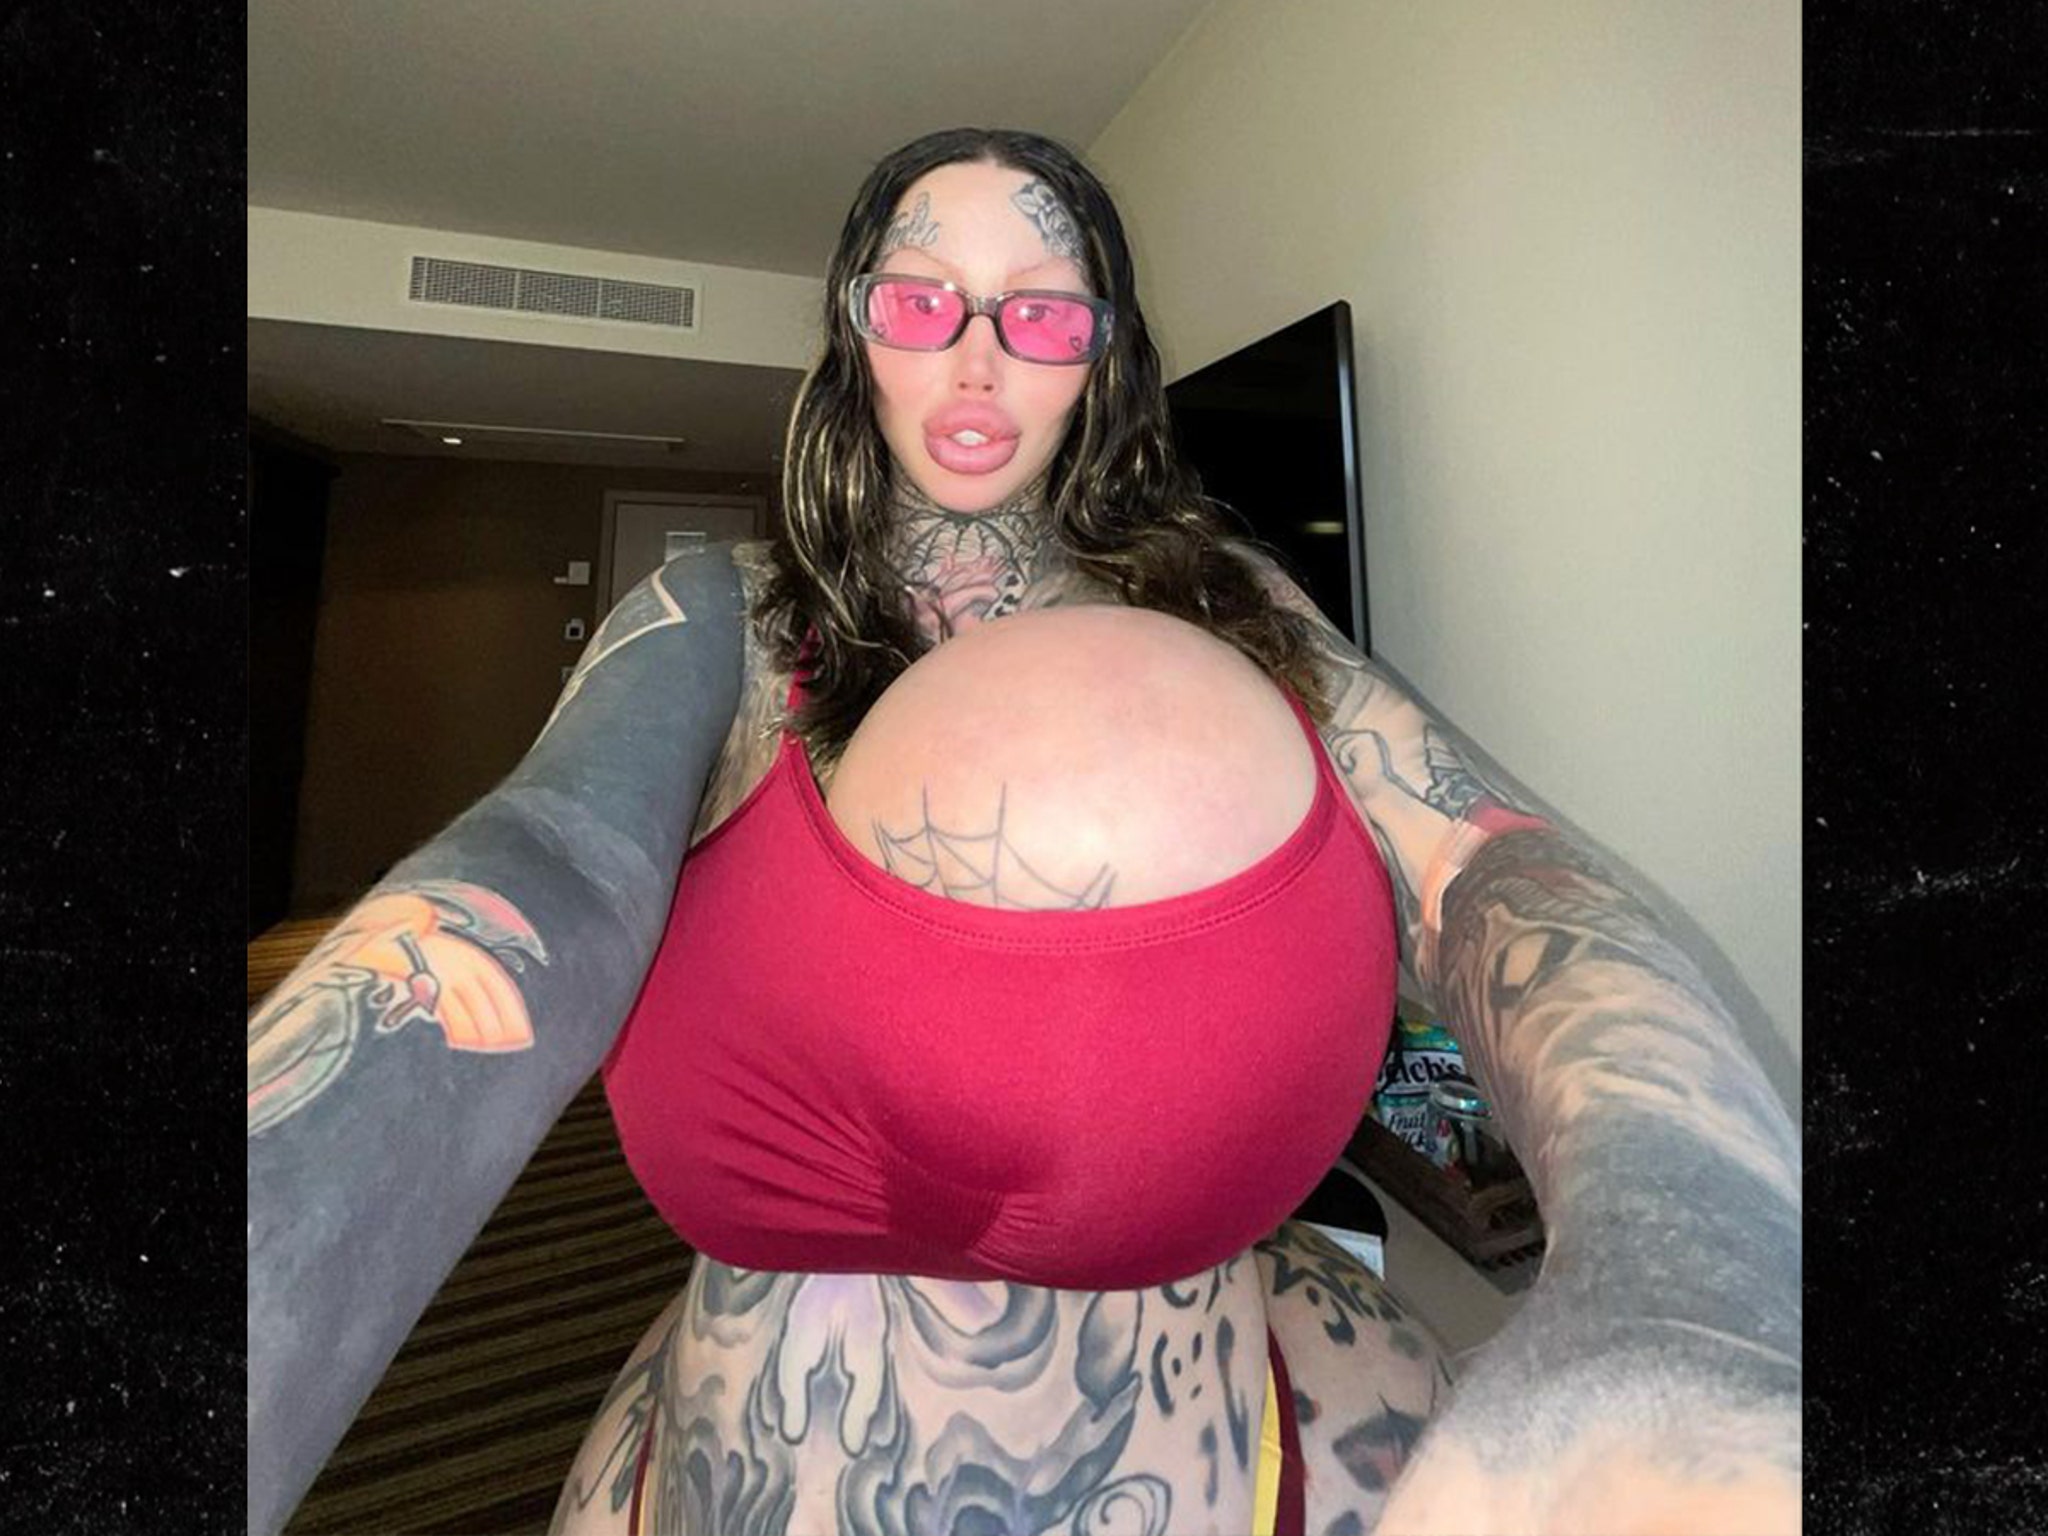 chris joans add teens with gigantic boobs photo